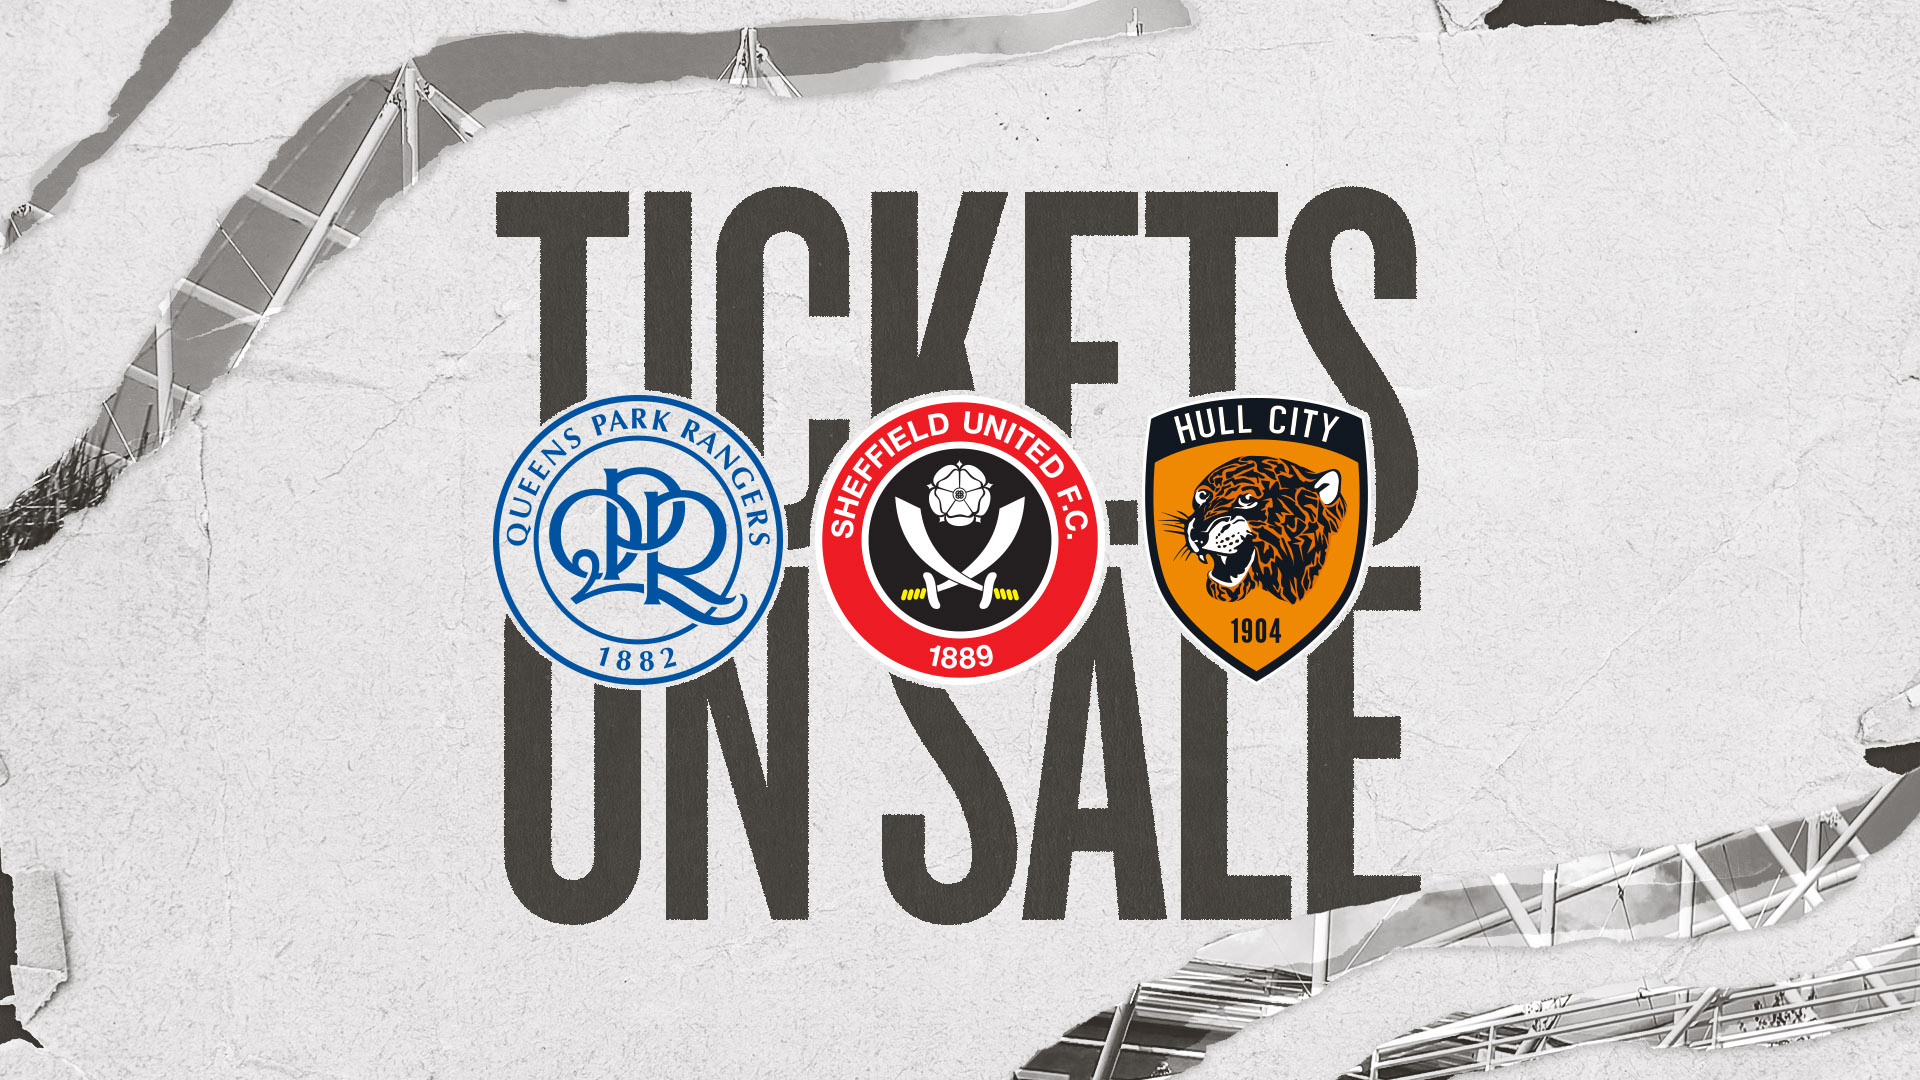 Tickets on sale text with QPR, Sheffield United and Hull City badges at forefront.